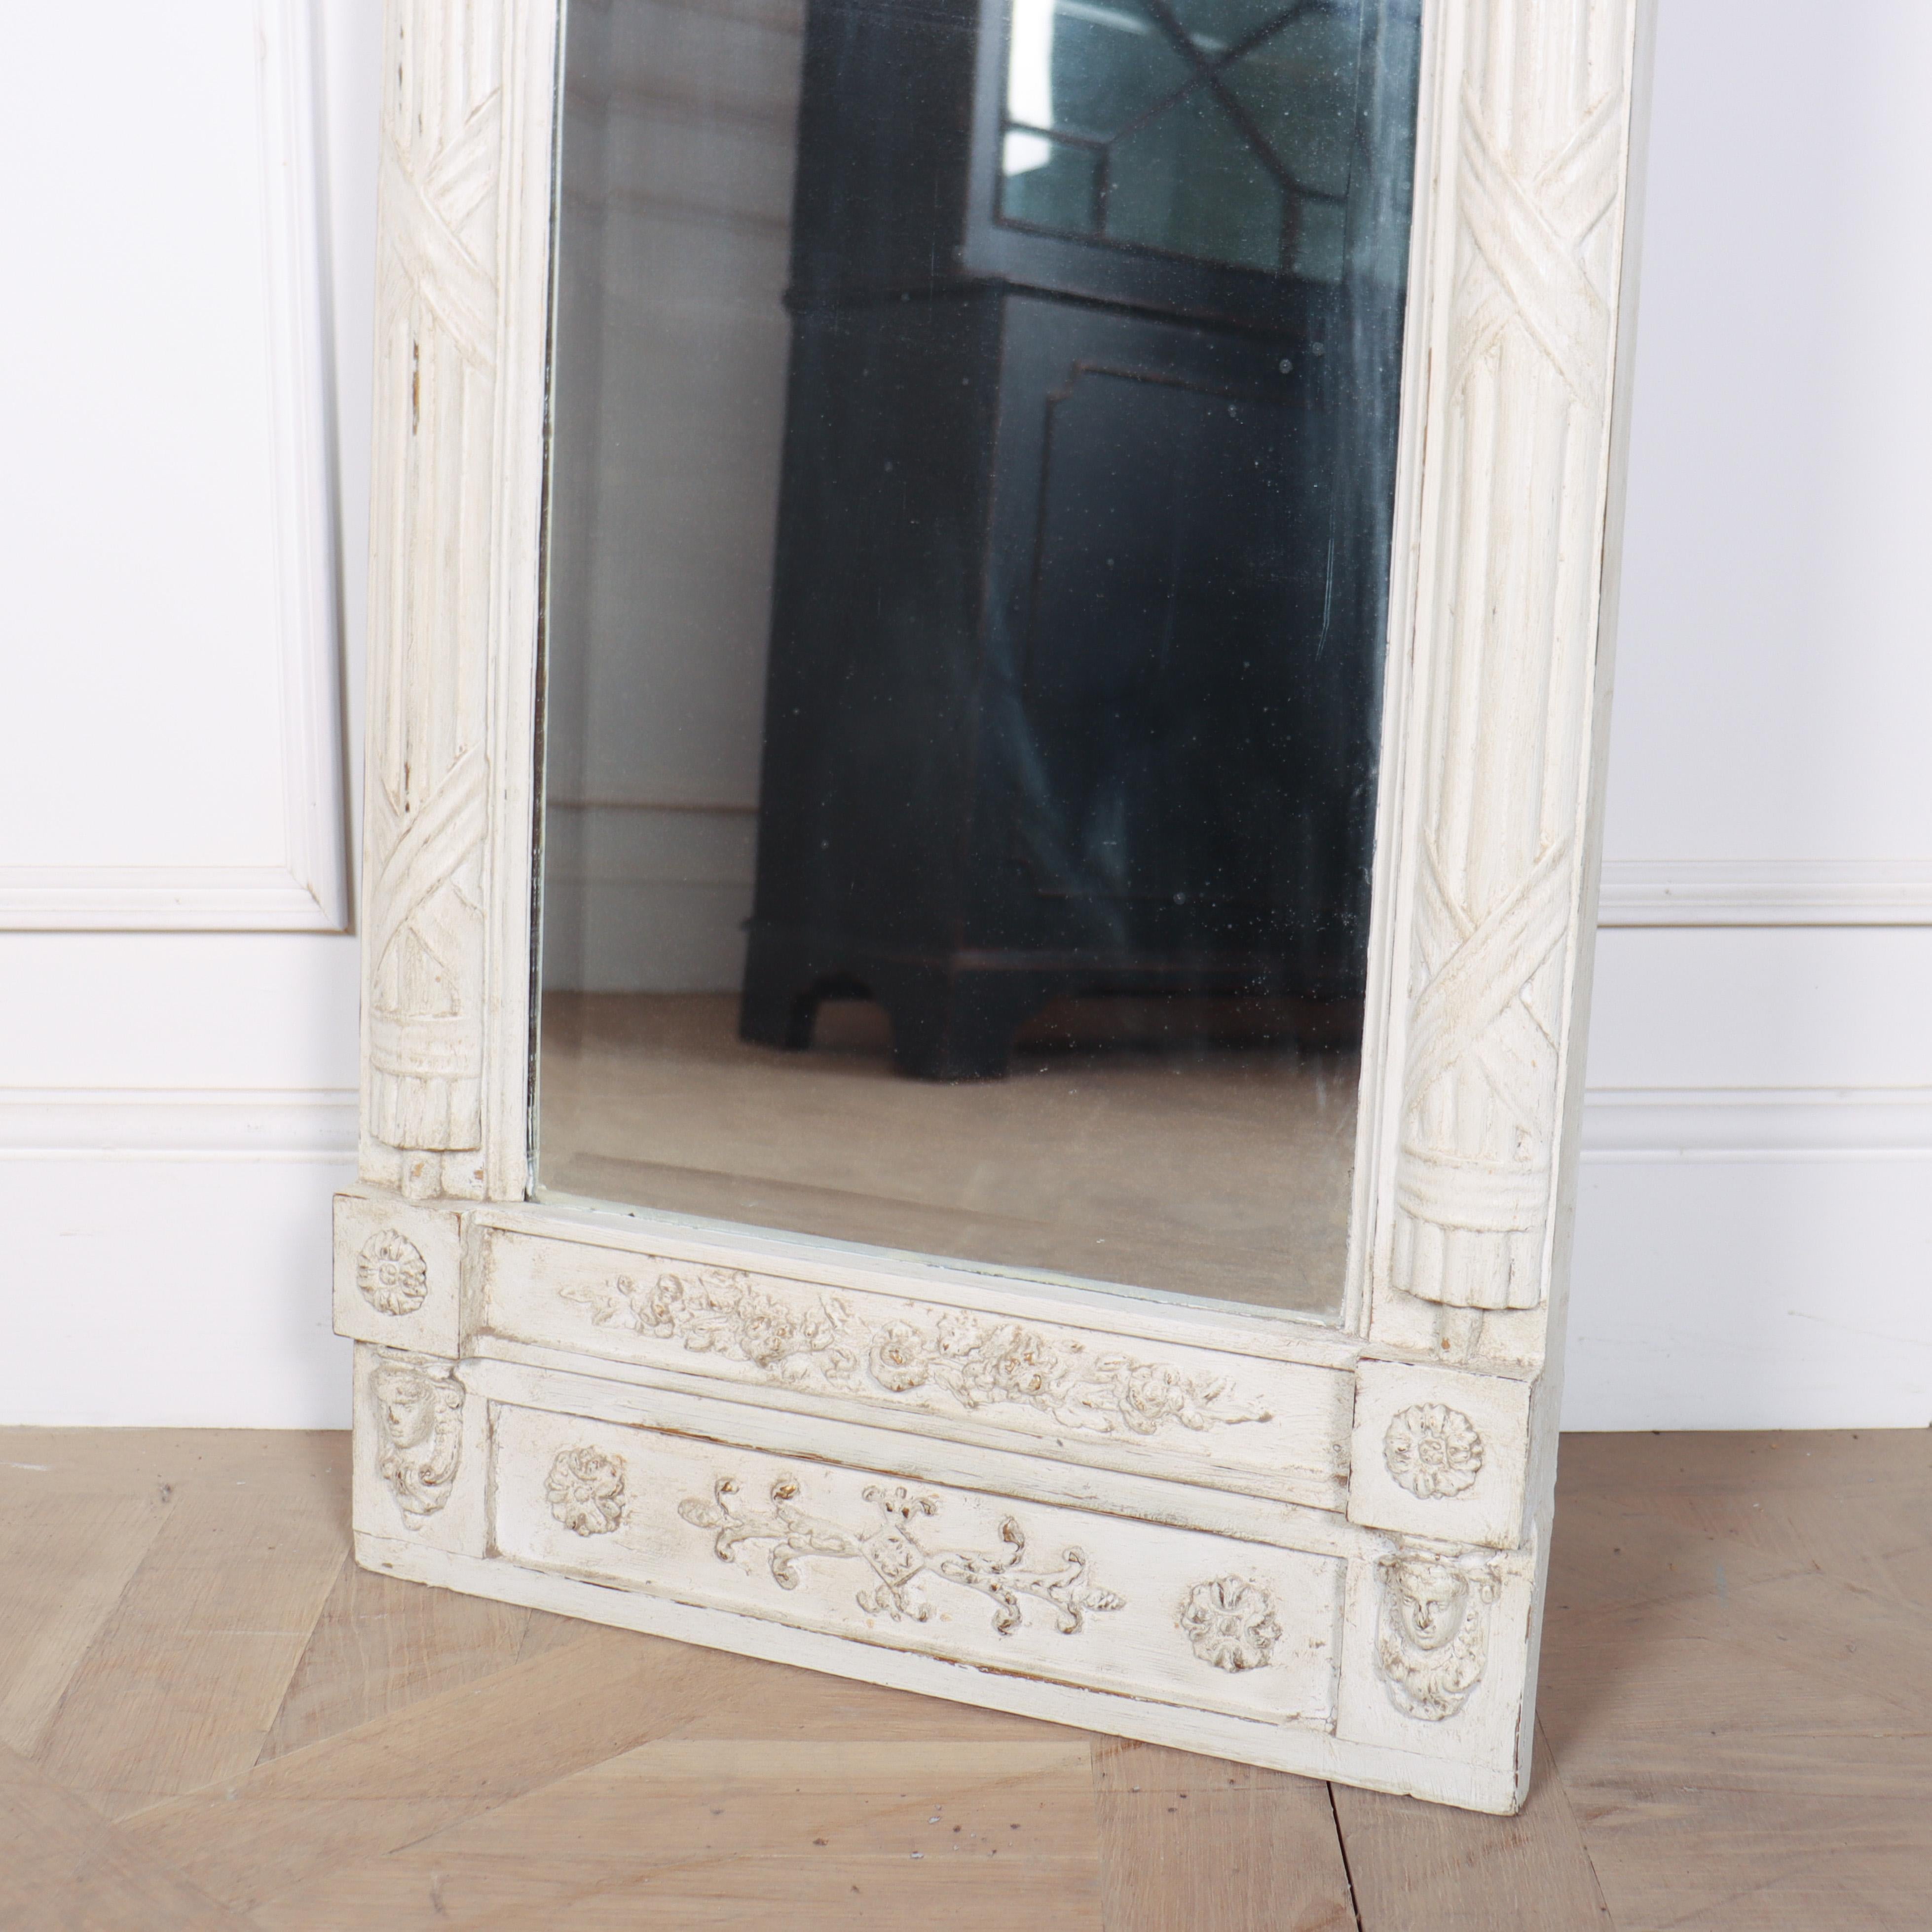 19th C Swedish carved and painted pine pier mirror with original mirror plate. 1890.

Reference: 7943

Dimensions
28 inches (71 cms) Wide
5 inches (13 cms) Deep
54.5 inches (138 cms) High